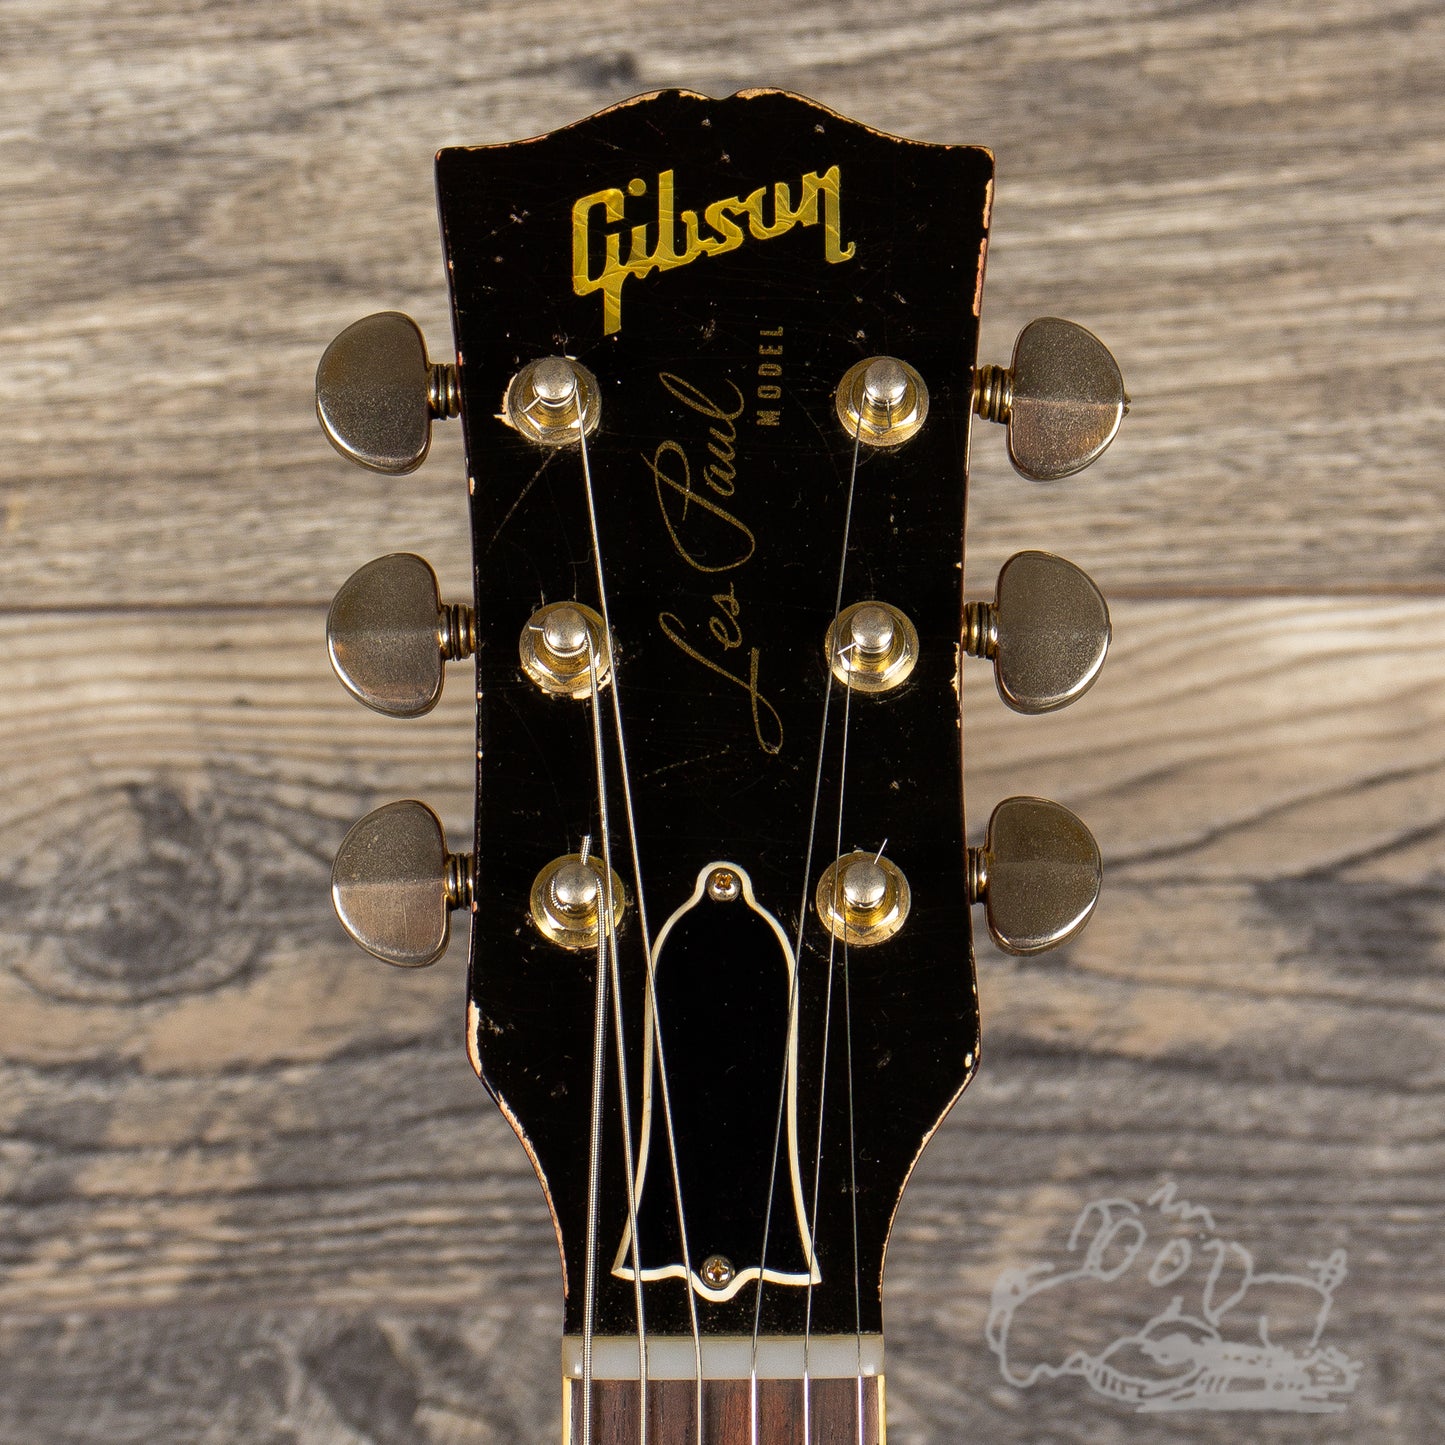 2015 Gibson Custom Shop Collectors Choice #29 with Historic Makeovers upgrades